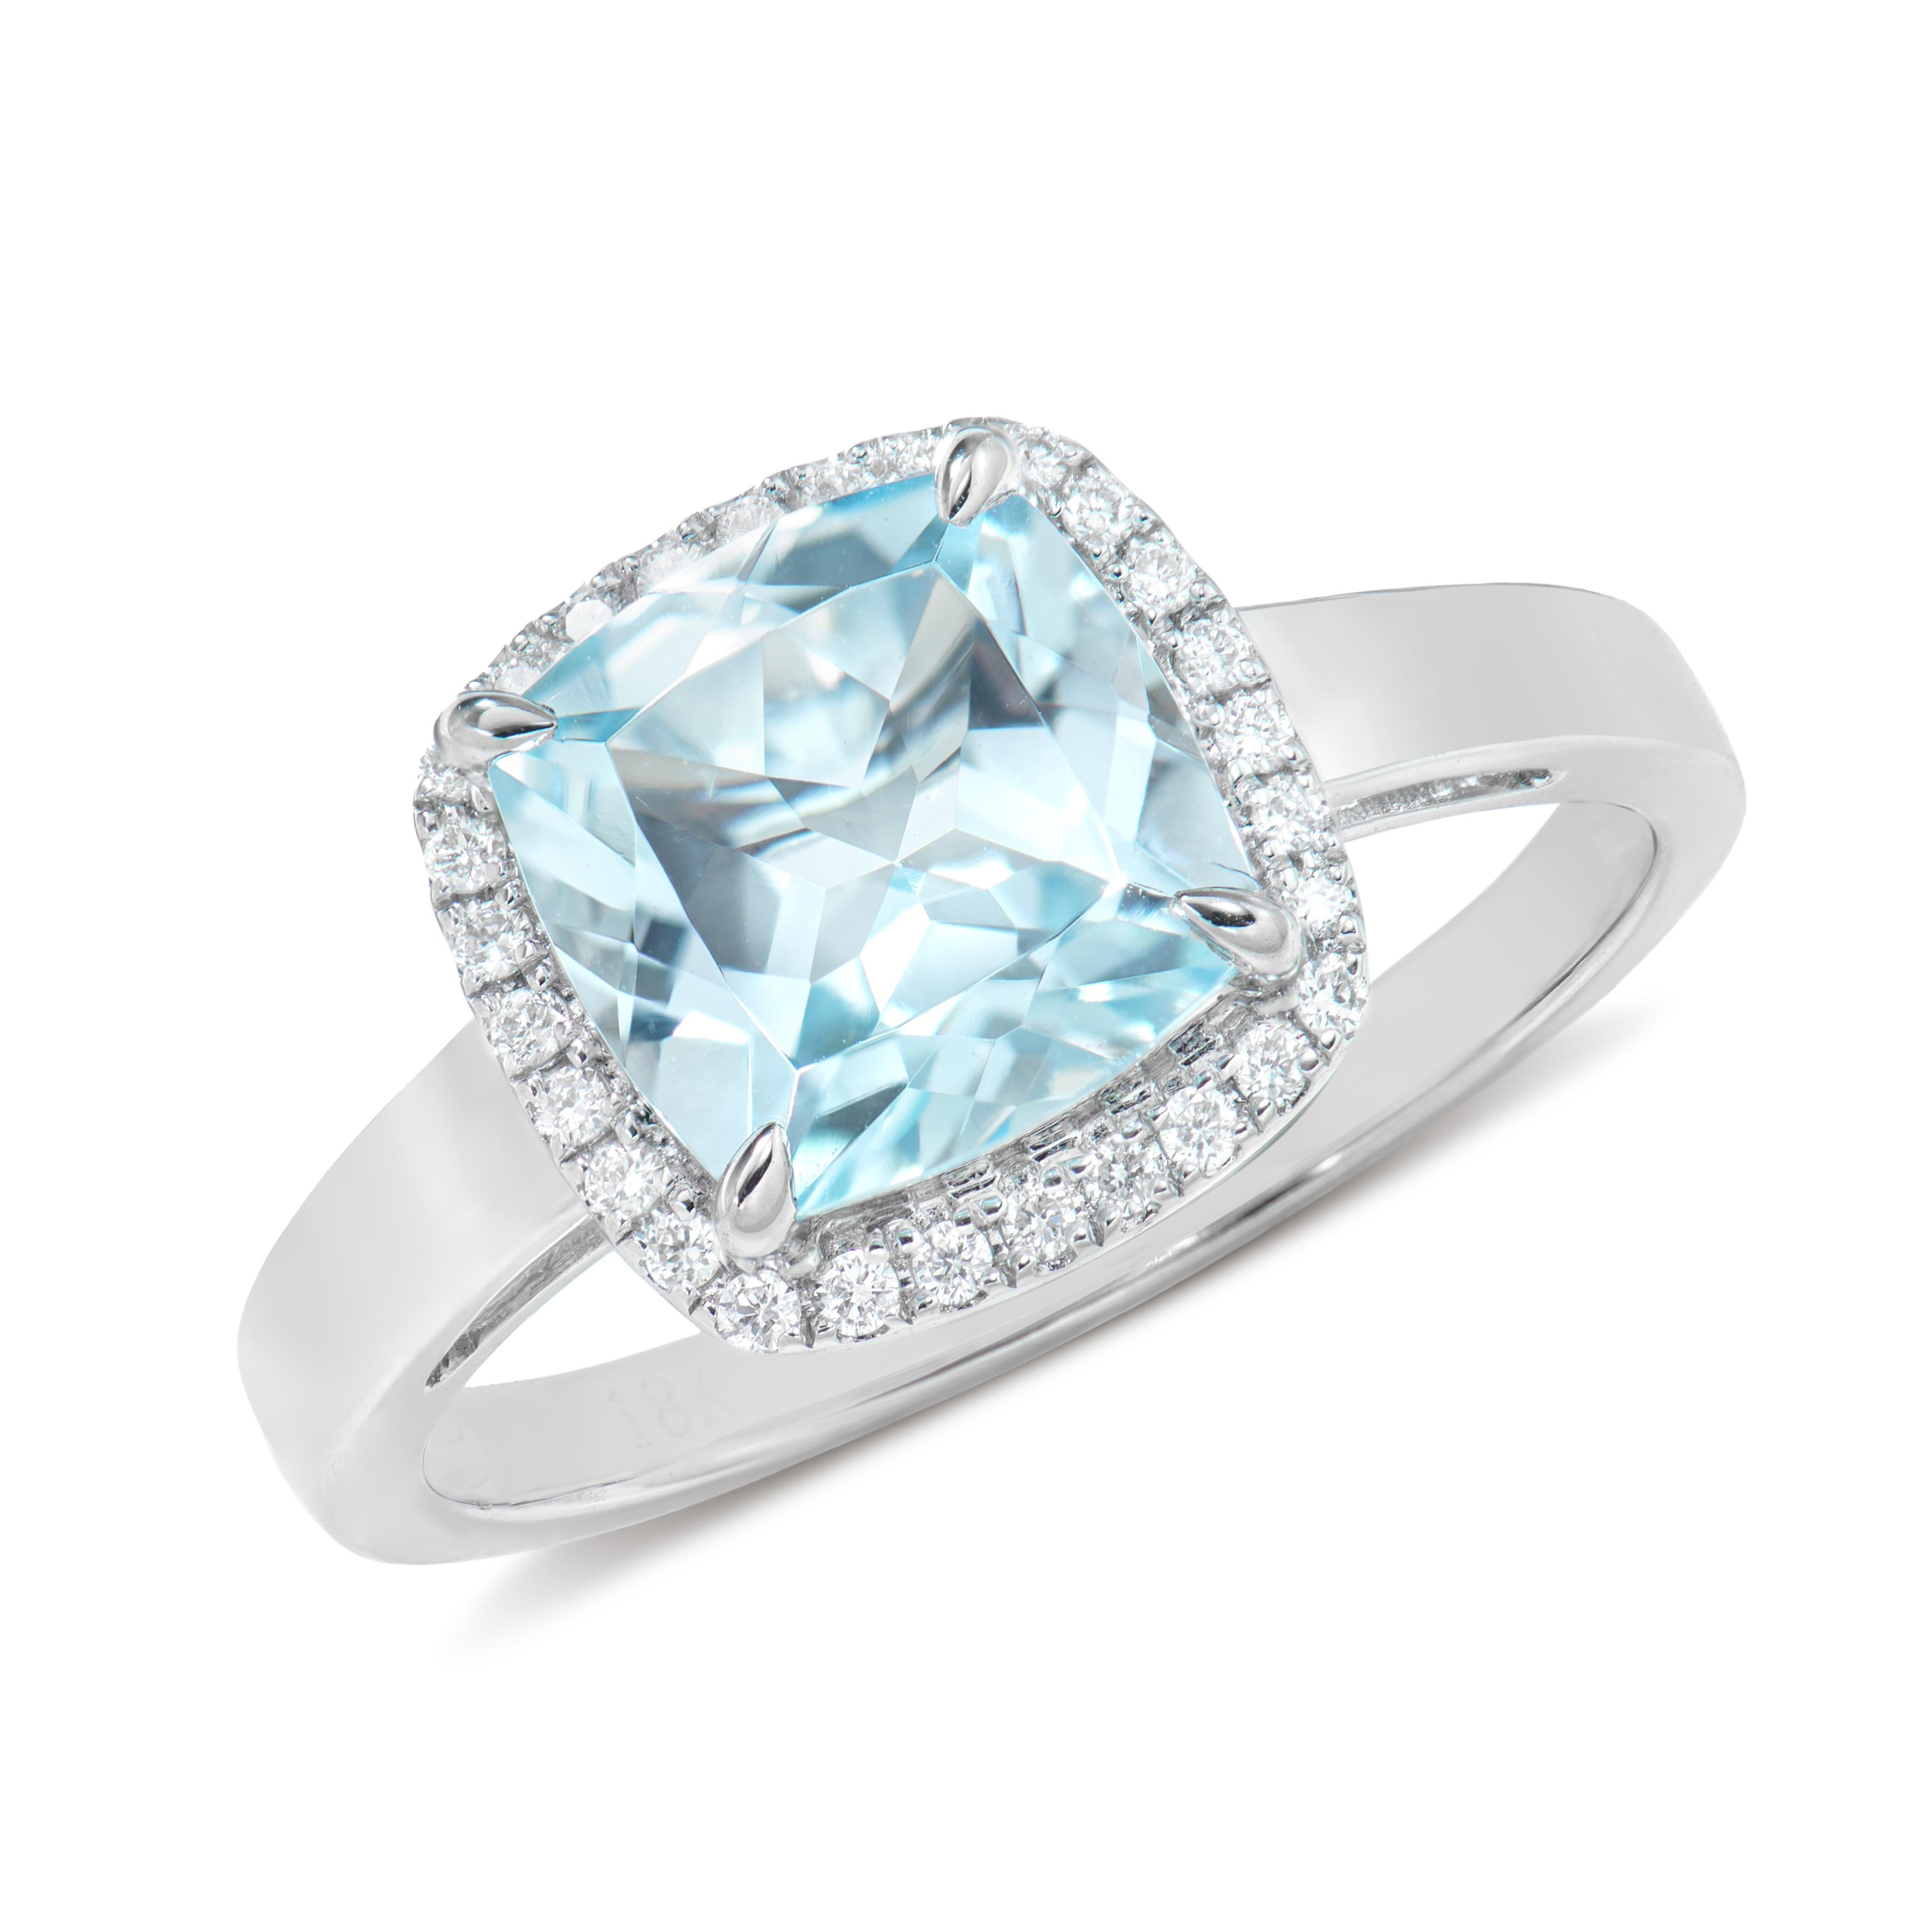 Cushion Cut 2.68 Carat Swiss Blue Topaz Fancy Ring in 18Karat White Gold with White Diamond. For Sale